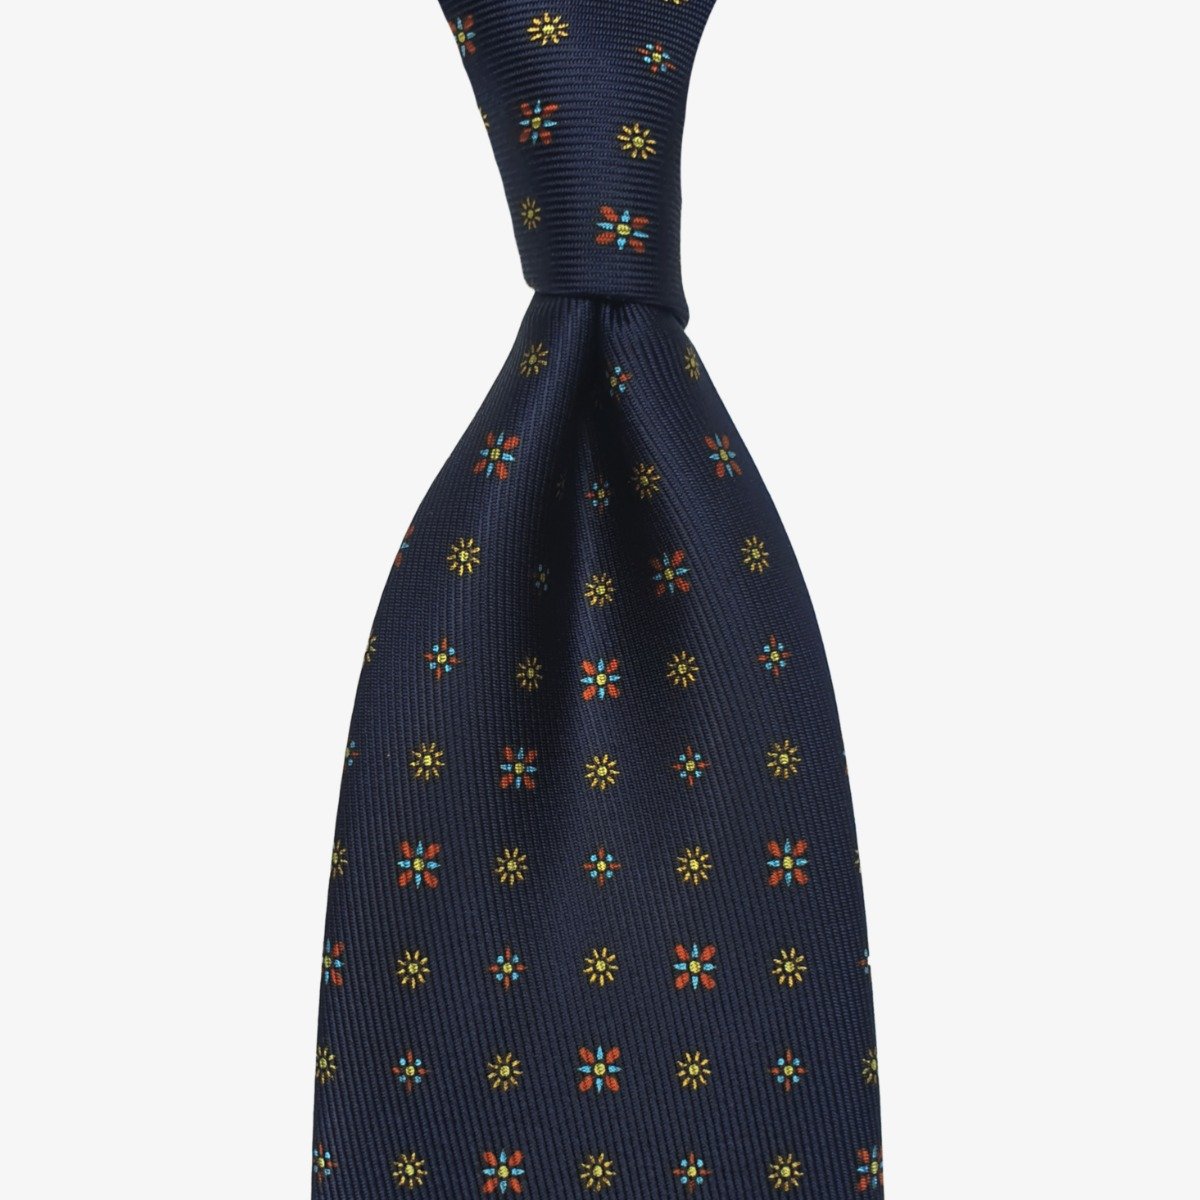 Shibumi Firenze 50oz navy blue silk tie with yellow floral pattern